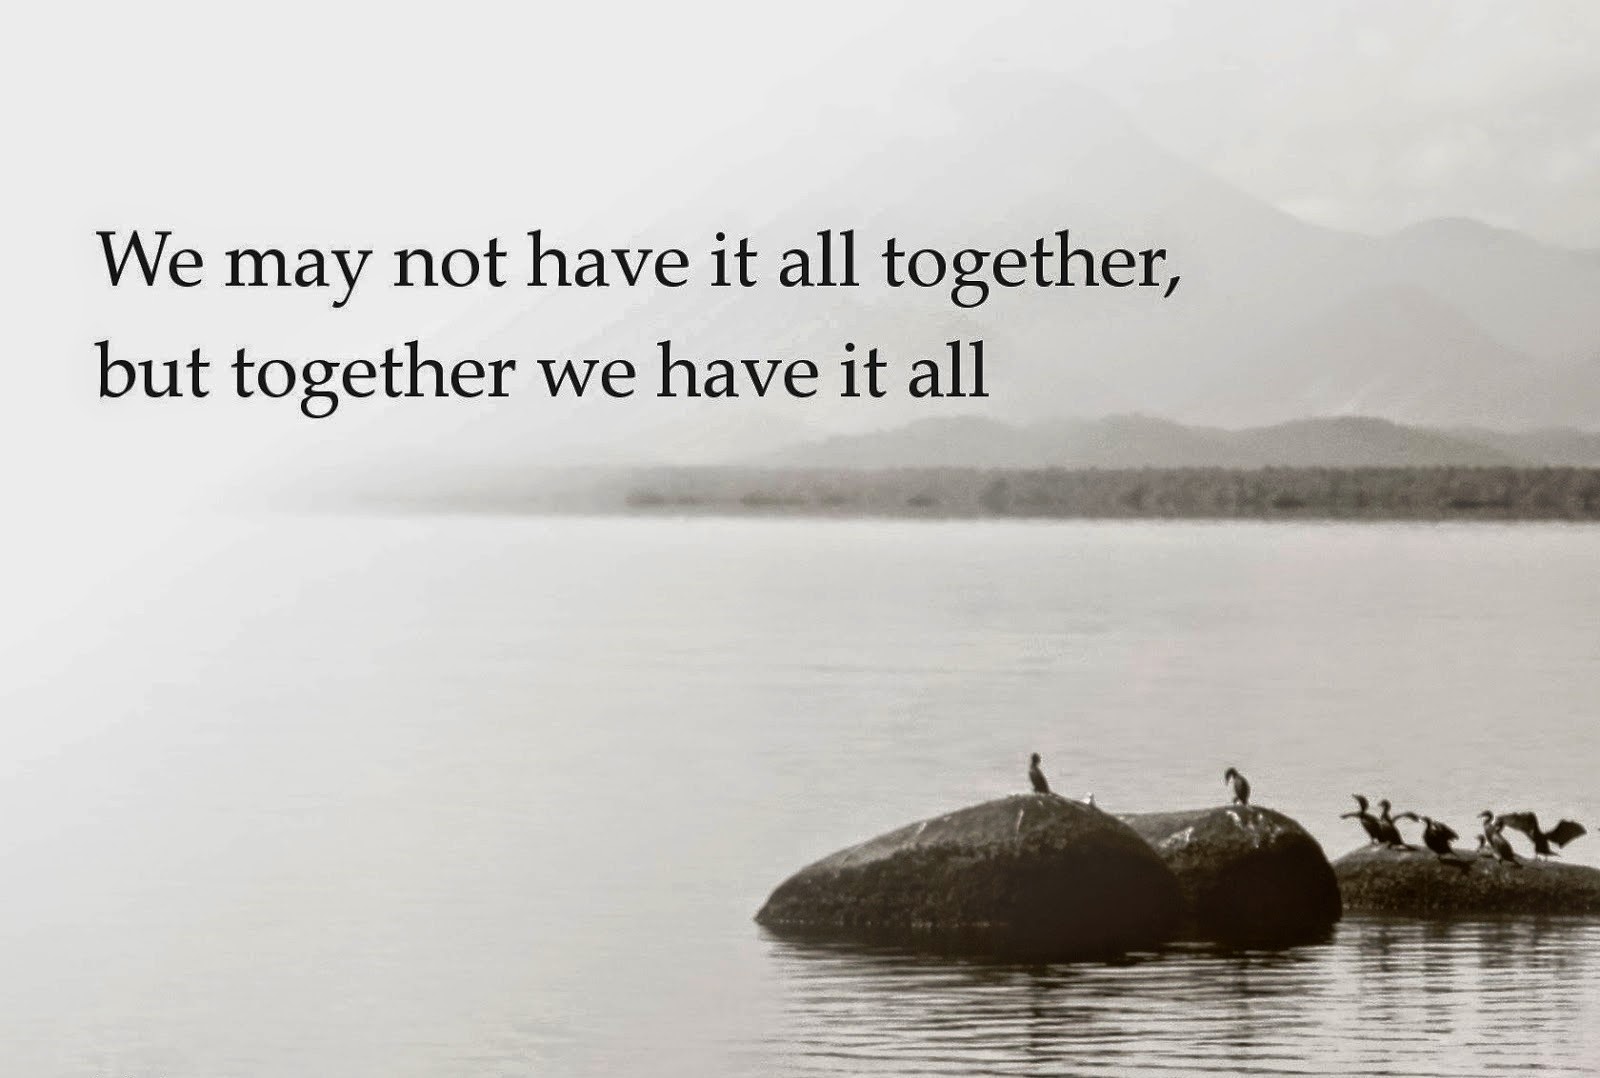 We may not have it all together, but together we have it all.